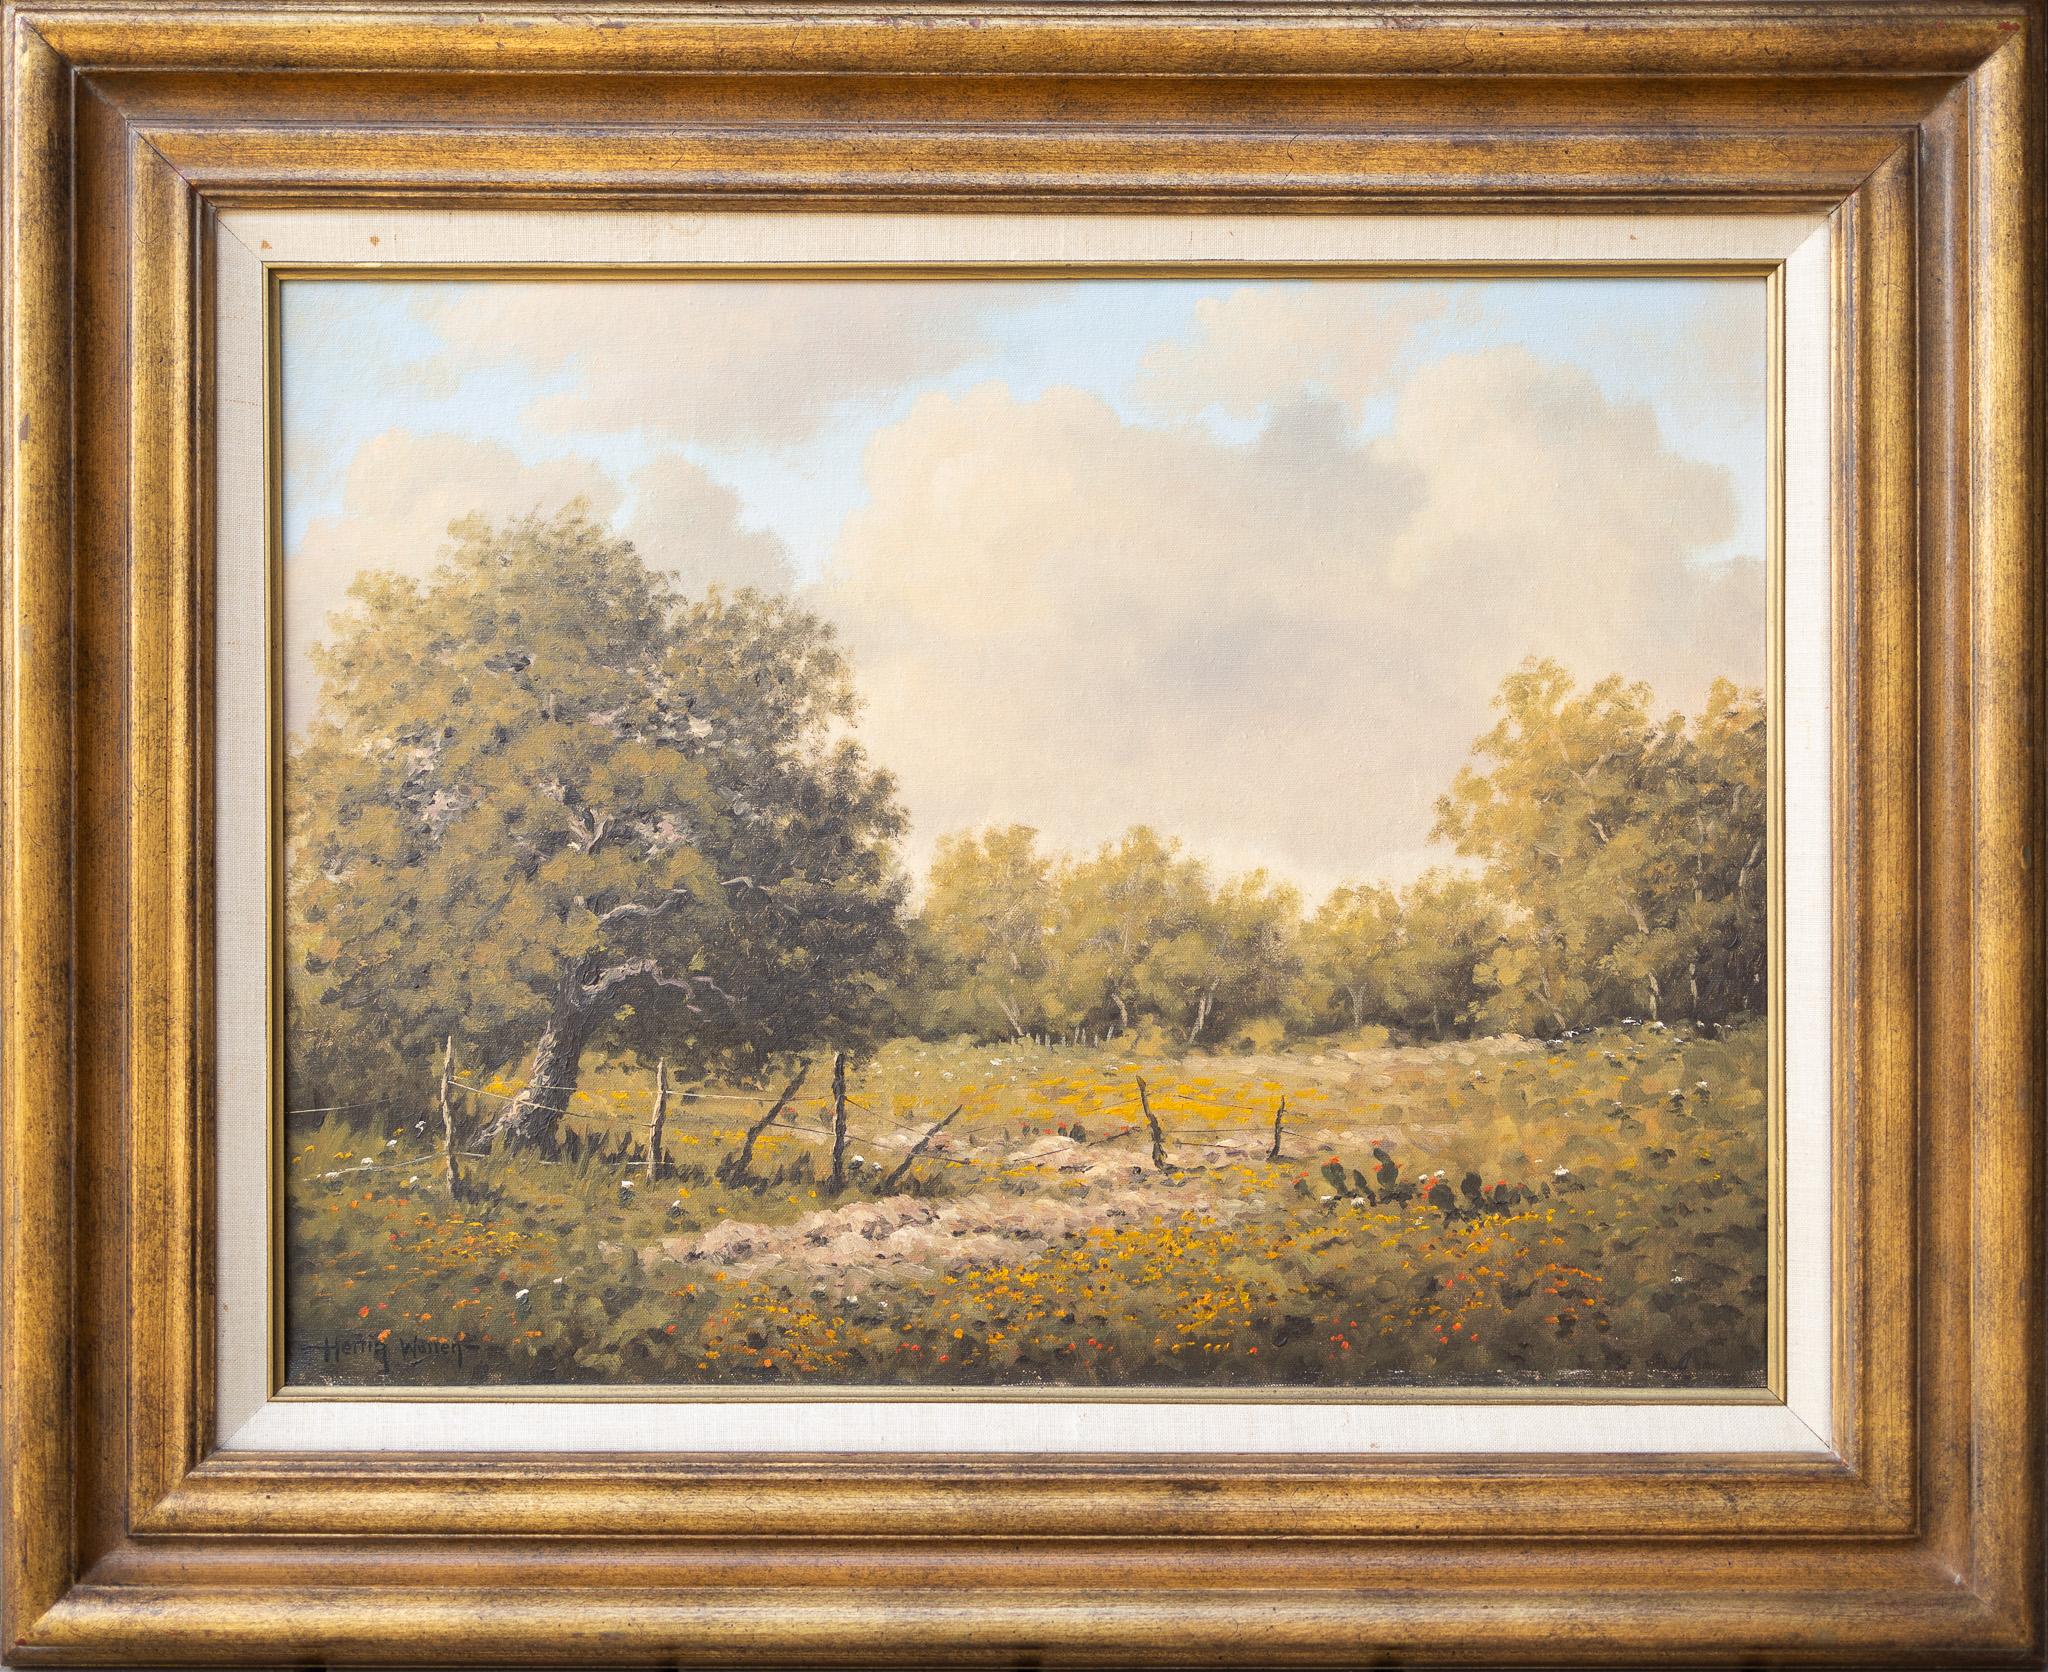 Texas Landscape with Yellow Wildflowers - Painting by Don Warren